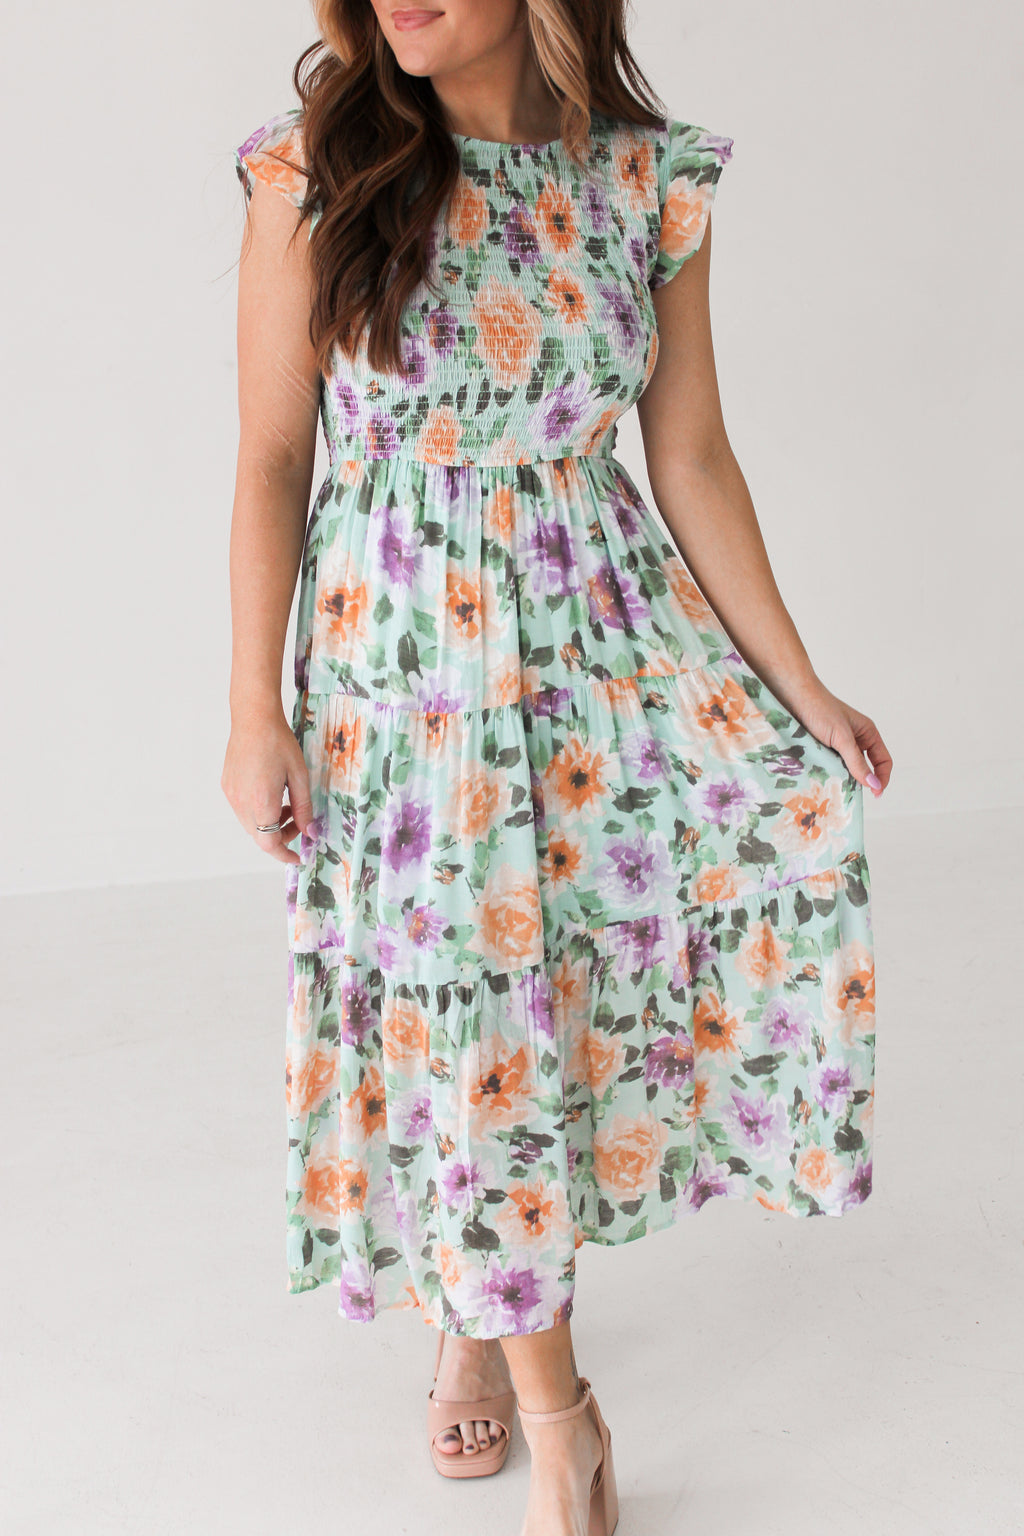 SPRING IS IN THE AIR MIDI | MINT FLORAL